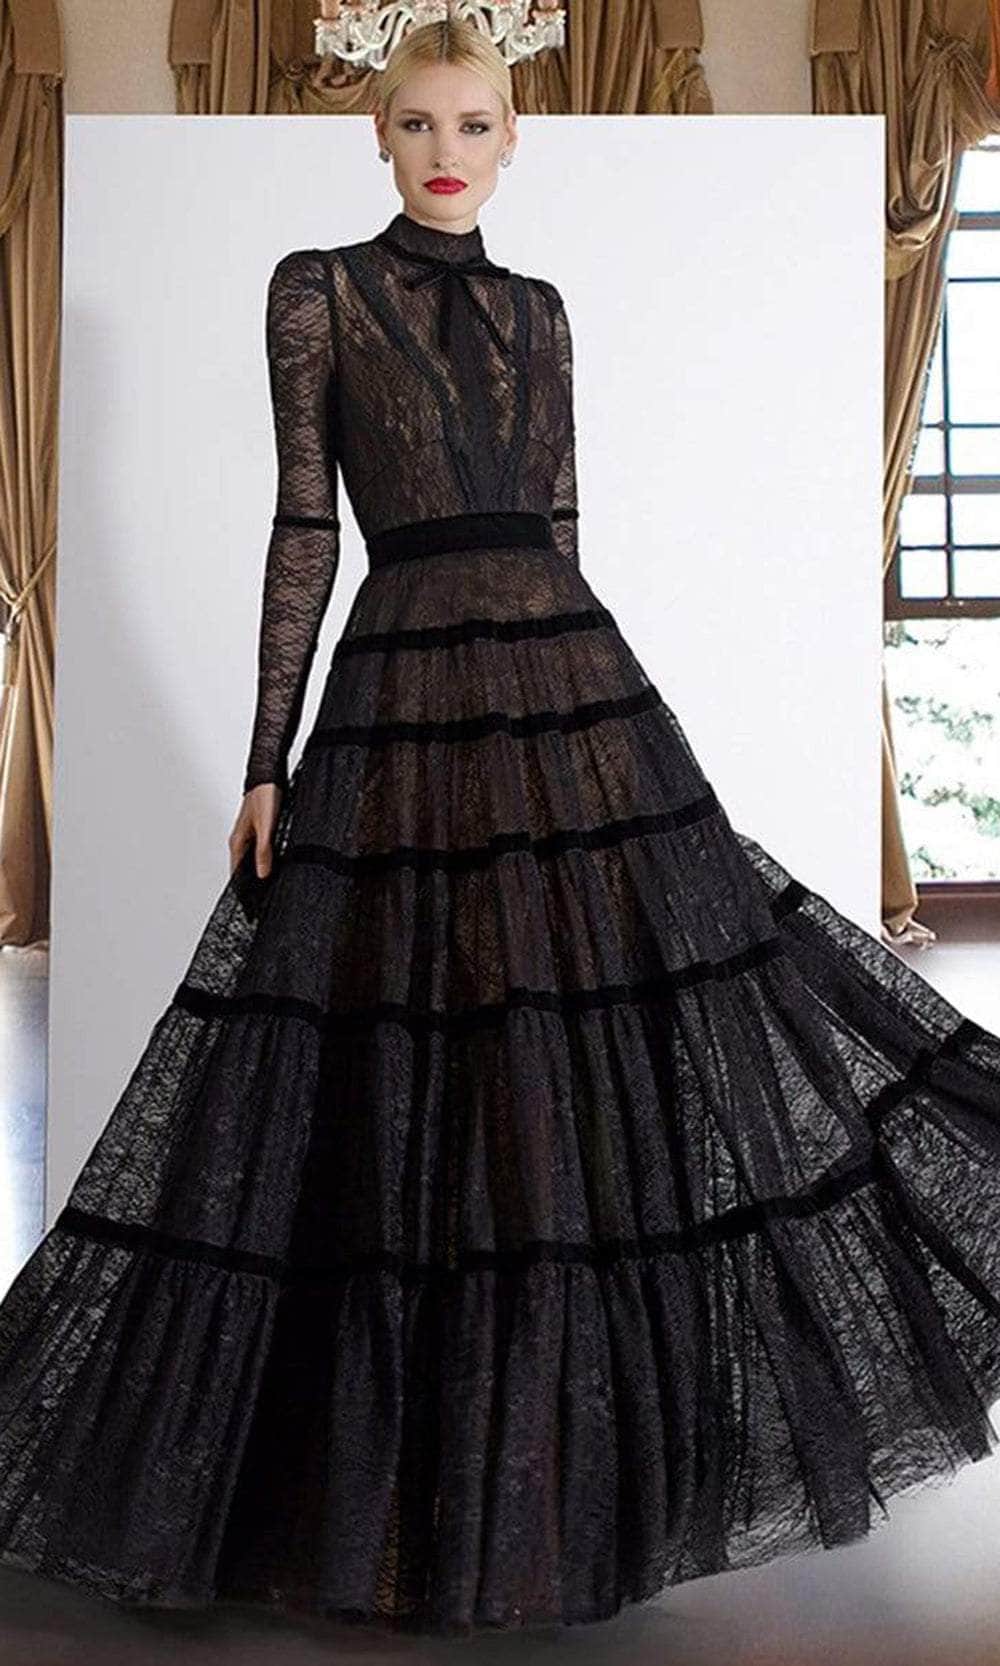 Janique - Lace Gown K7031
 In Black